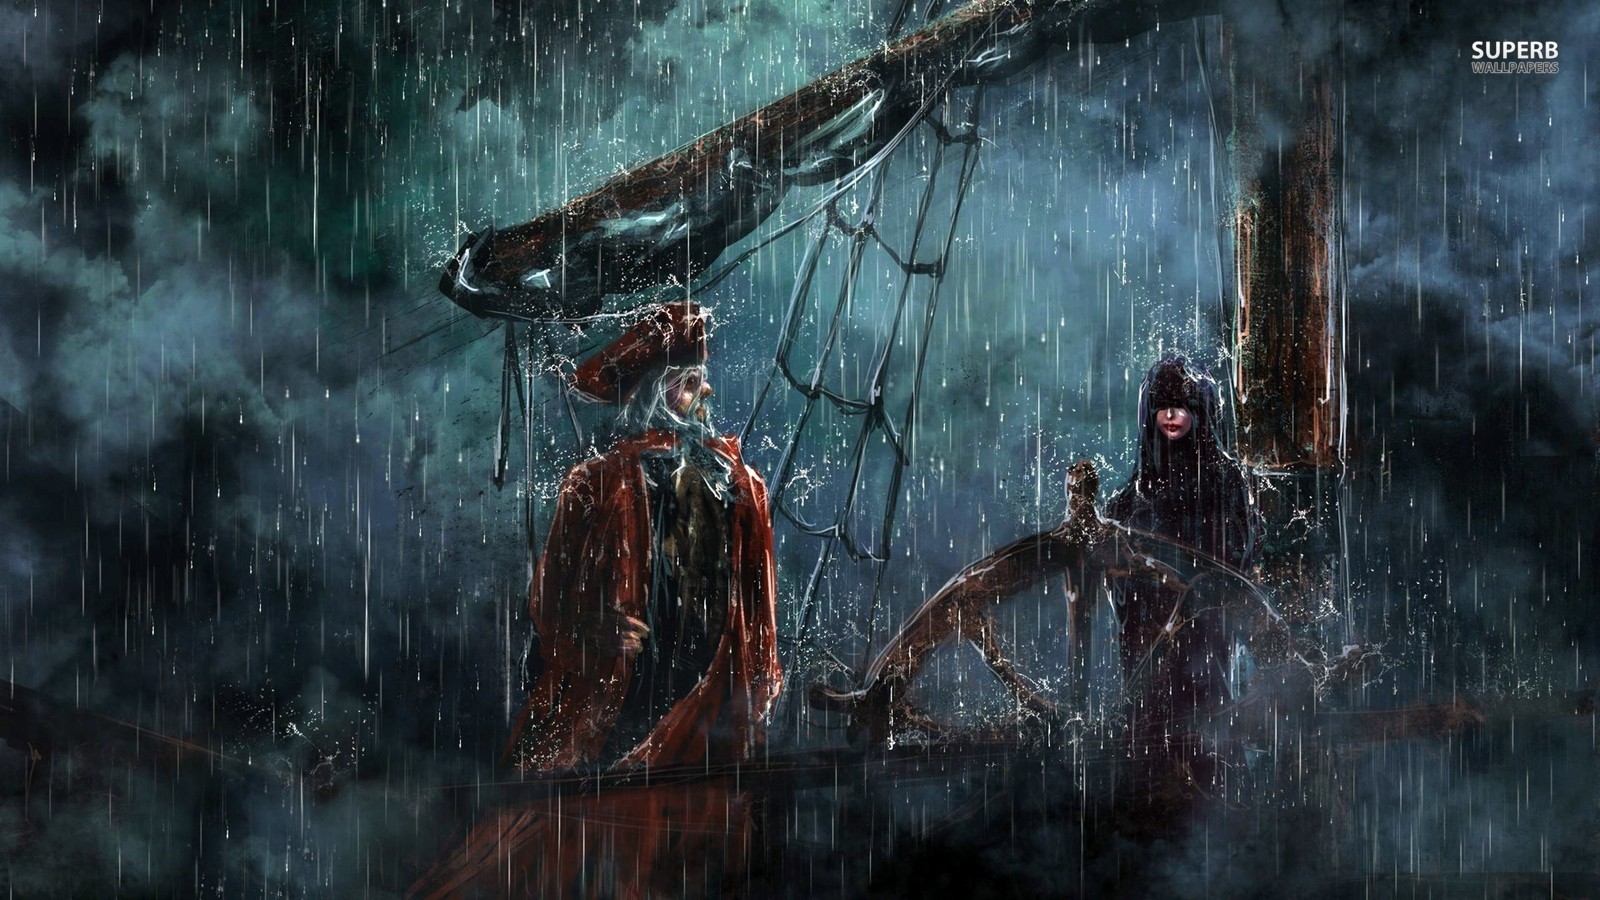 Fantasy  Pirate  Water  Ocean  Ship  Dark  Gothic  Battle Wallpaper   Pirates of the caribbean Pirate images Ghost ship